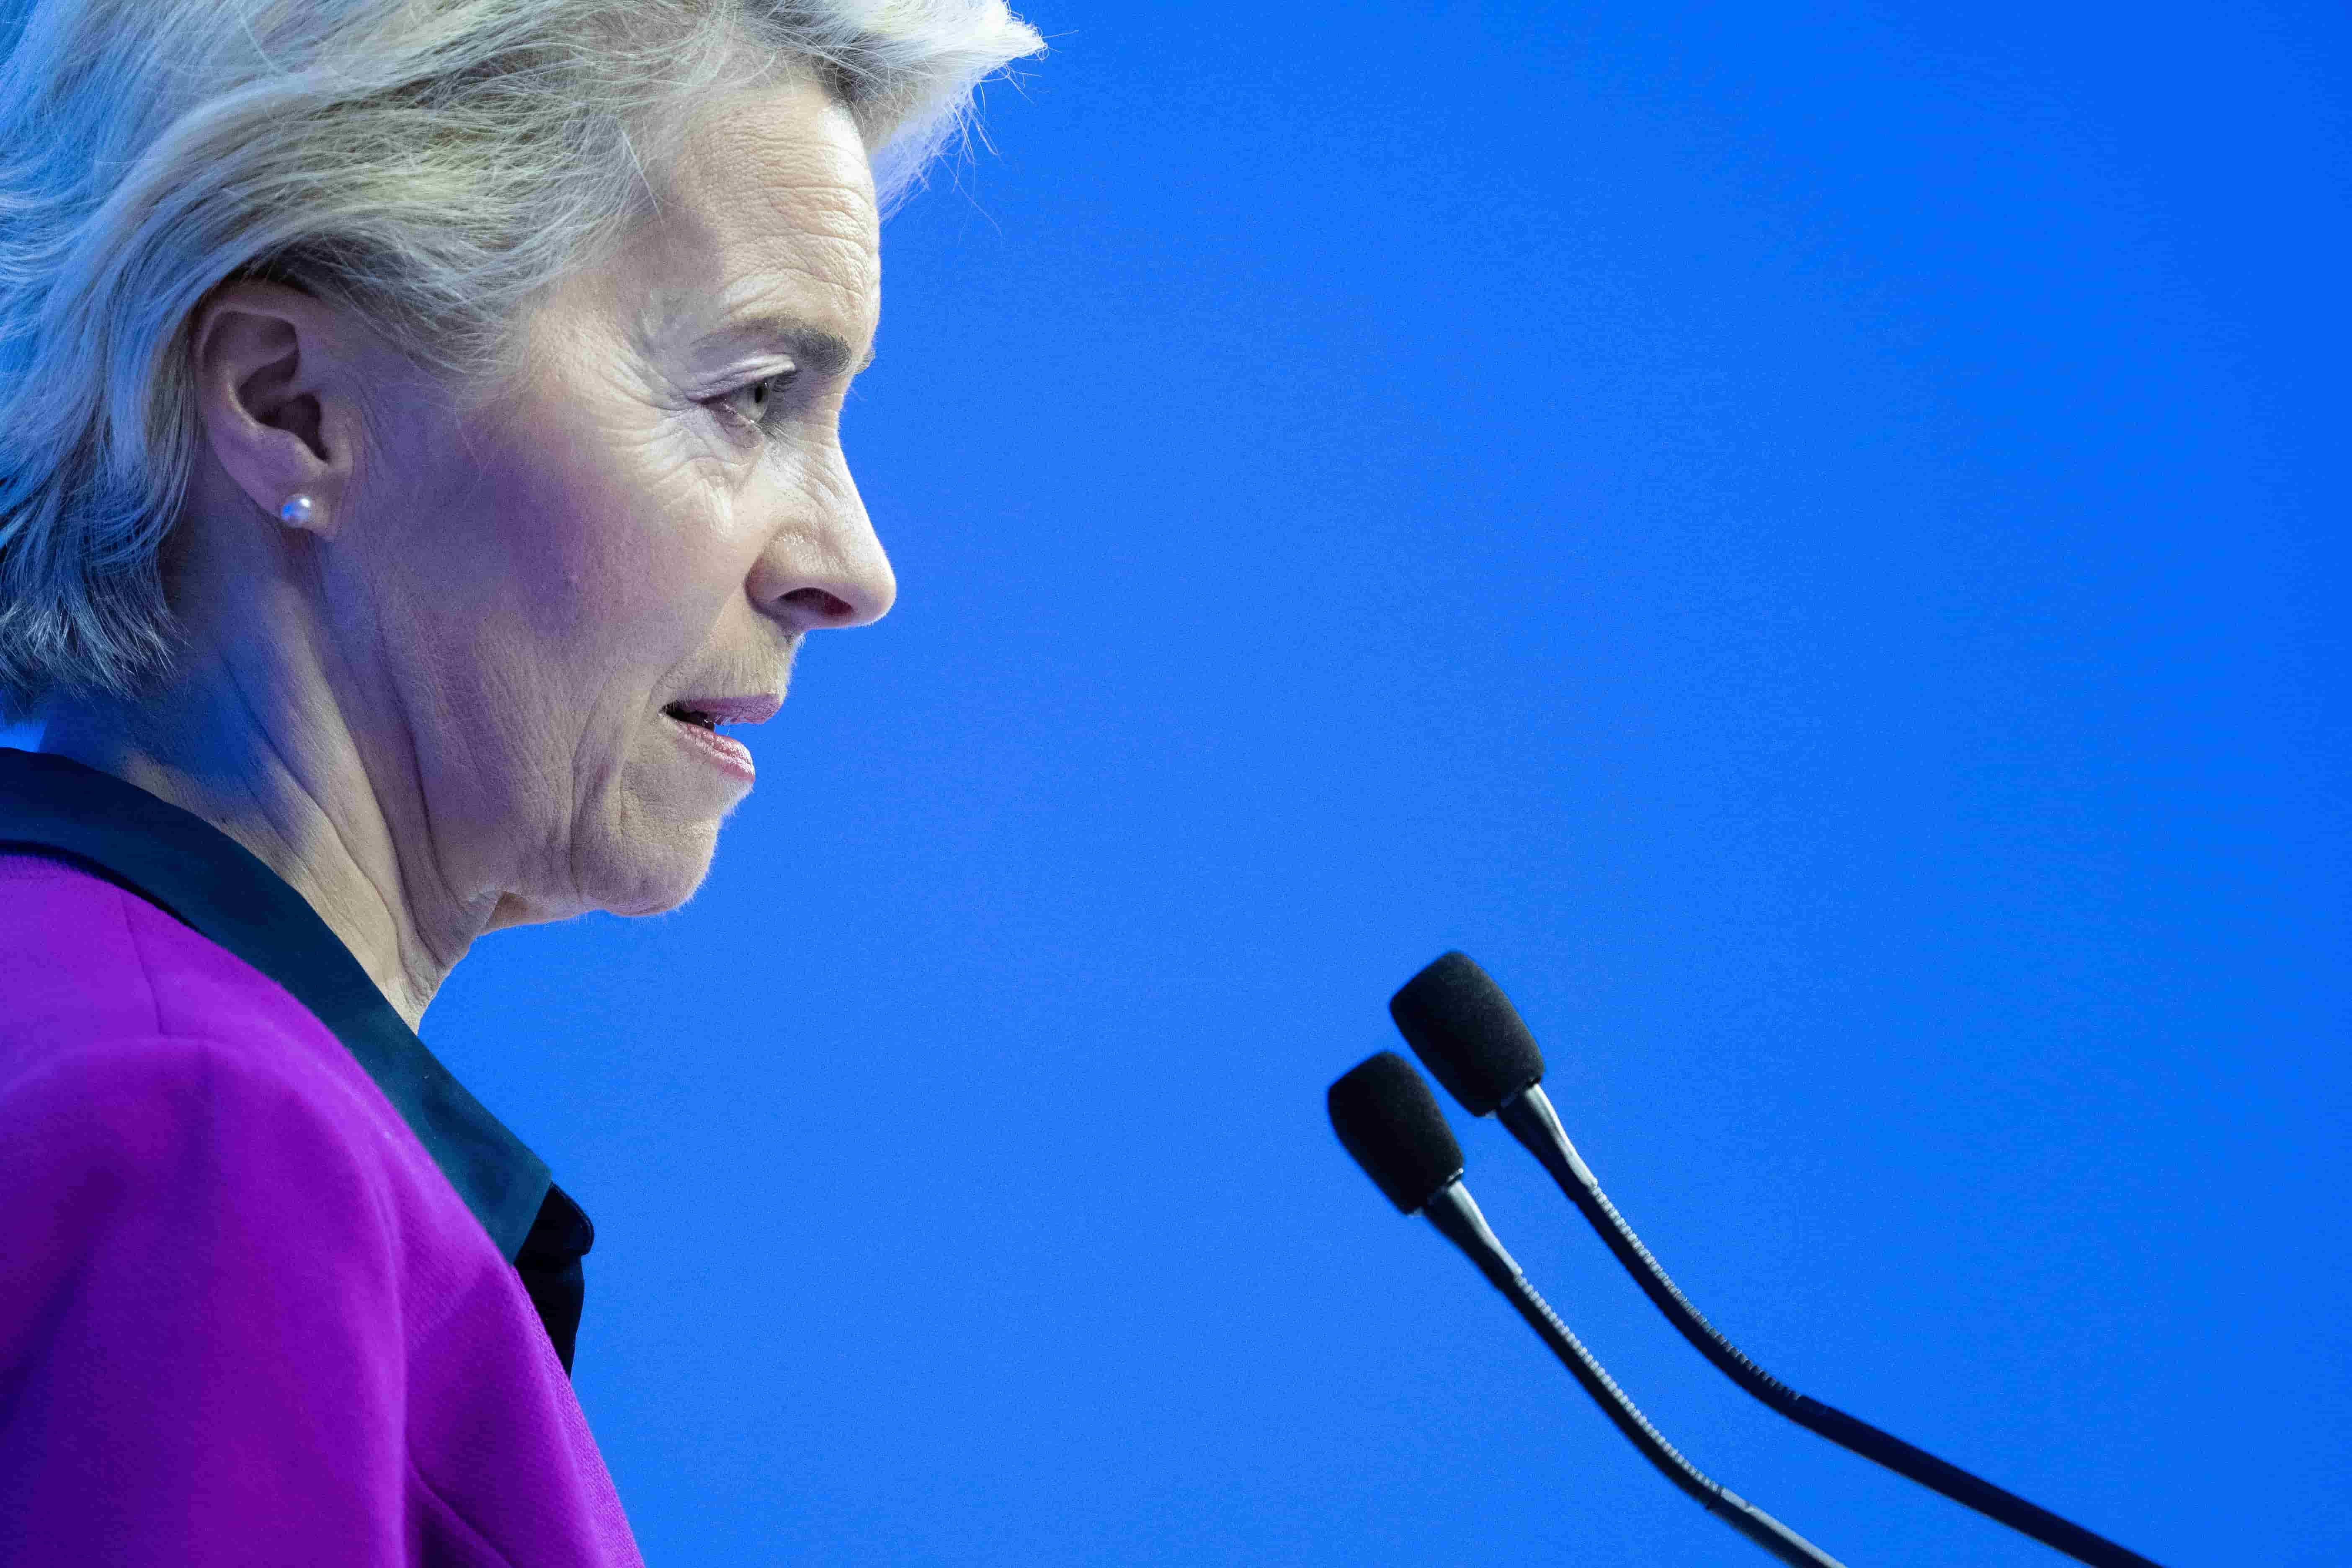 European Commission President Ursula von der Leyen has moved closer to the US position on security and technology issues than some other European Union officials (World Economic Forum/Greg Beadle/Flickr)